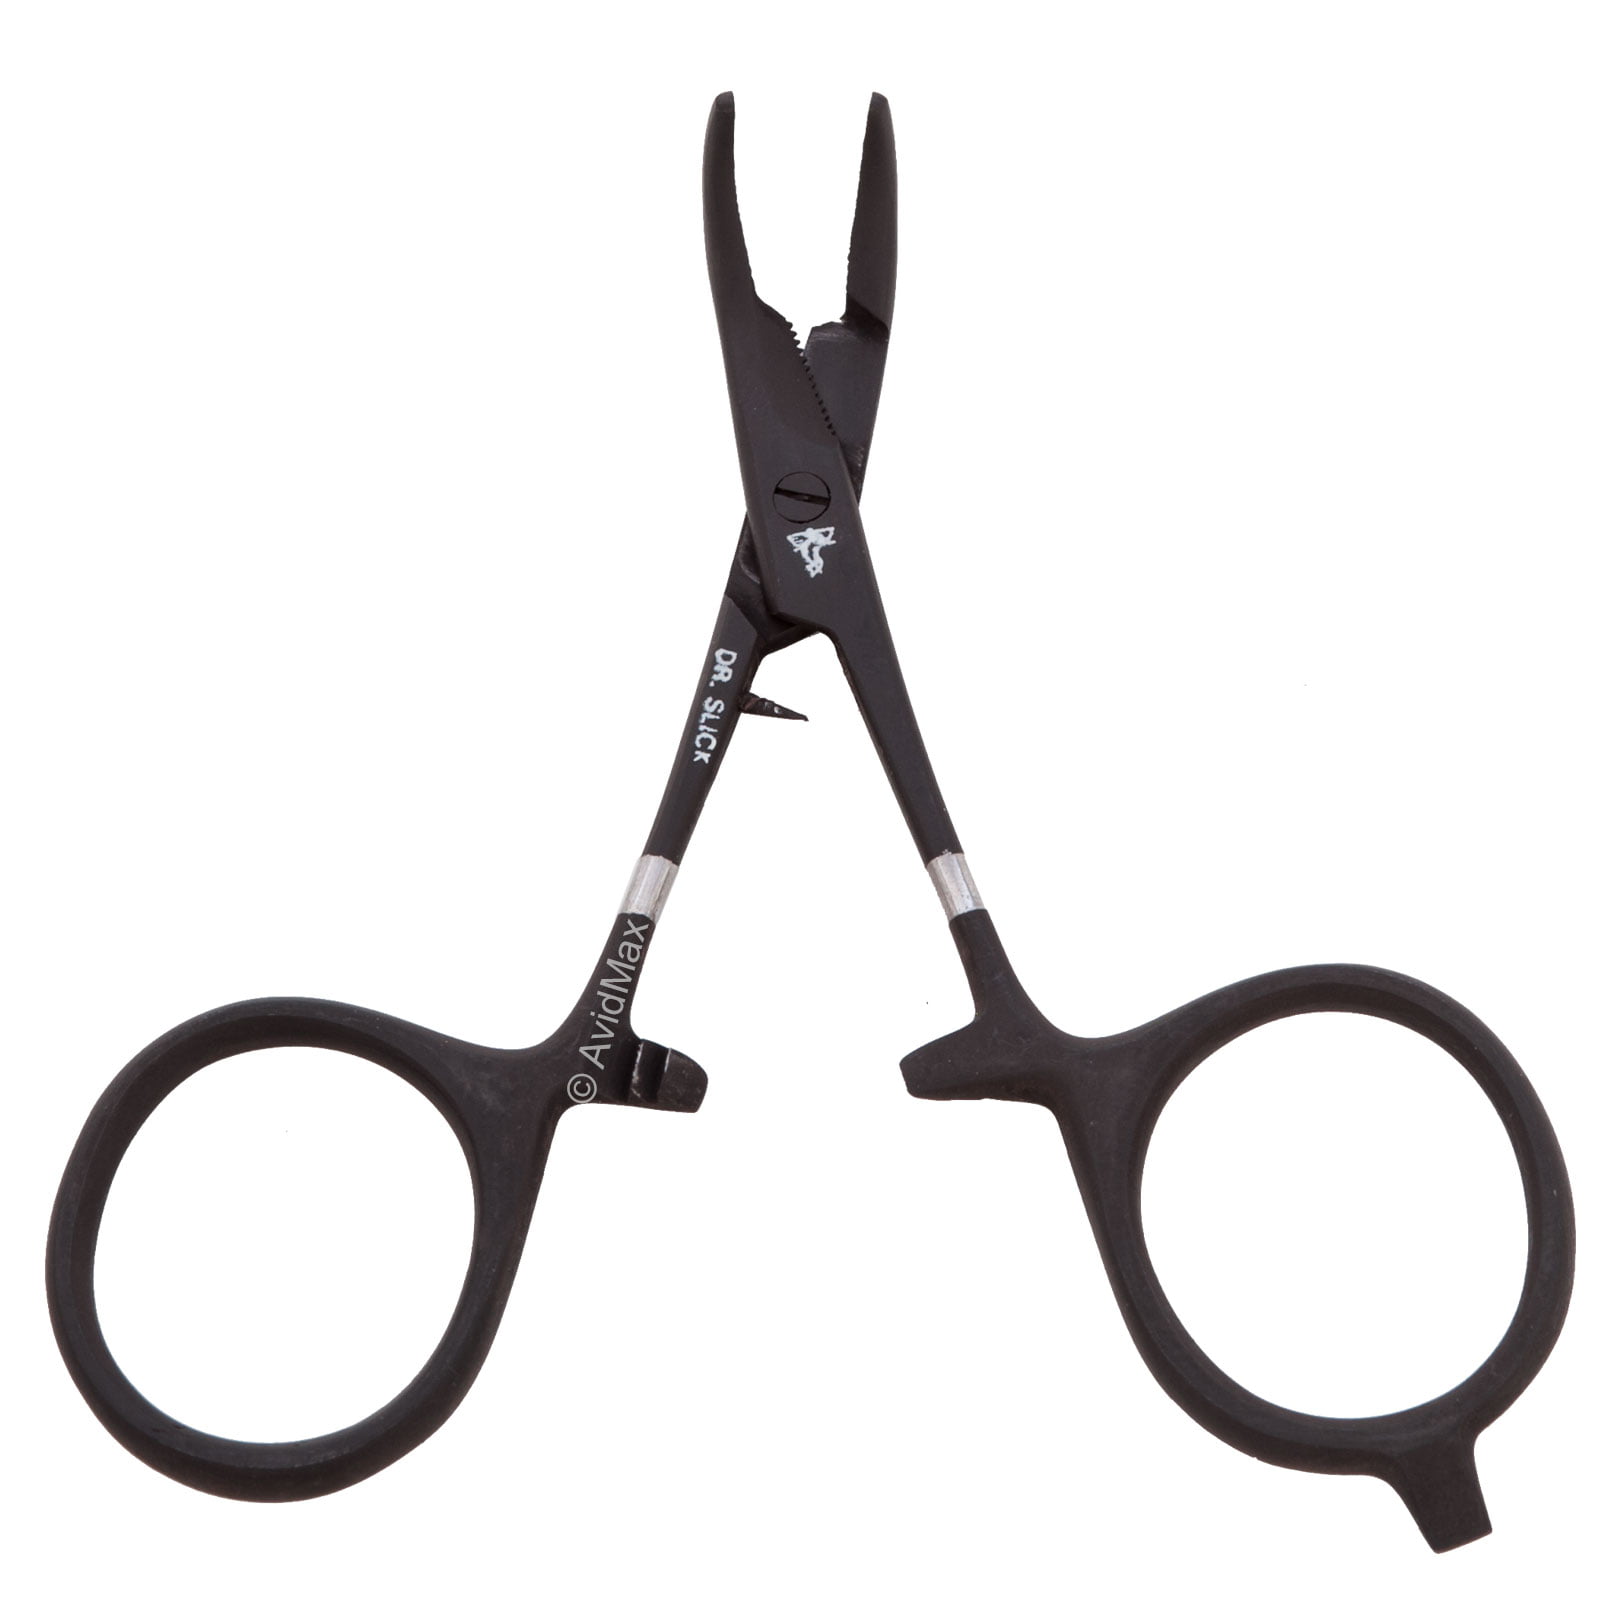 Dr. Slick Scissor Clamps Forceps for Fly Fishing Tool 